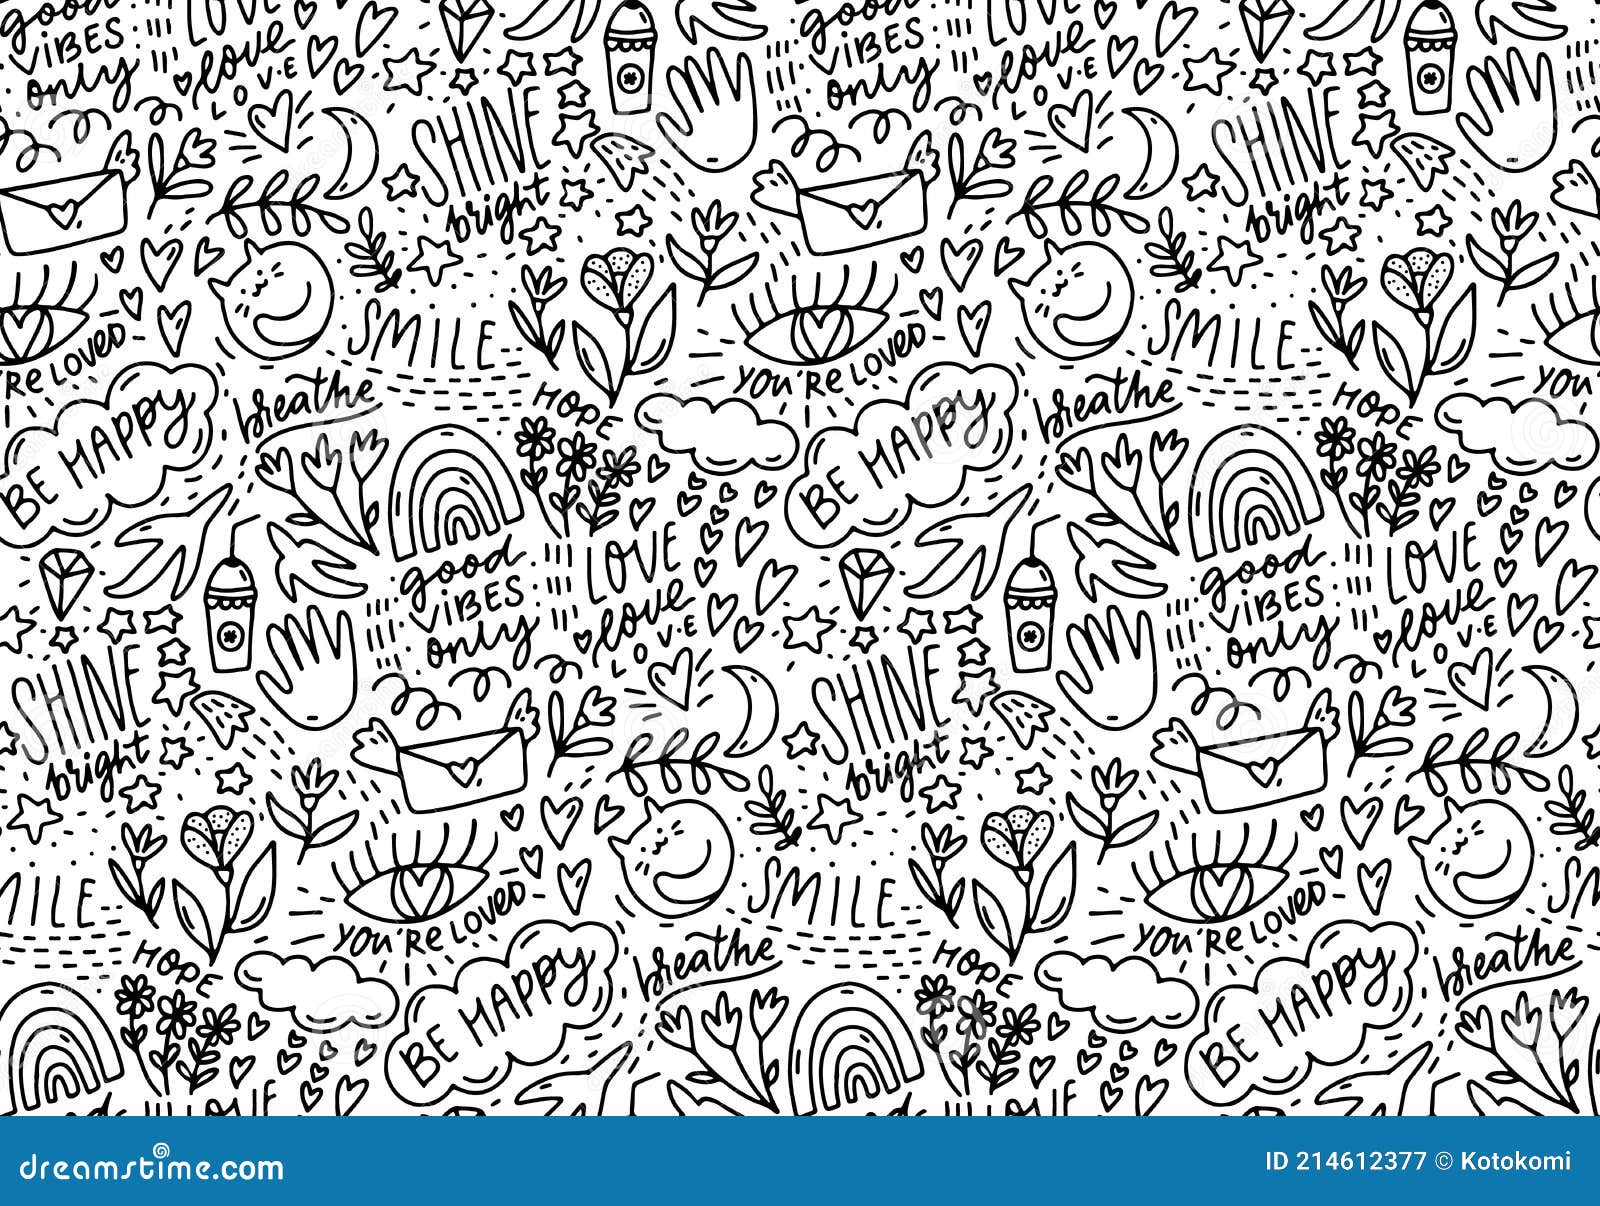 positive words doodle pattern, lots of hand drawn s and sayings. smile, be happy, shine - handwriting text